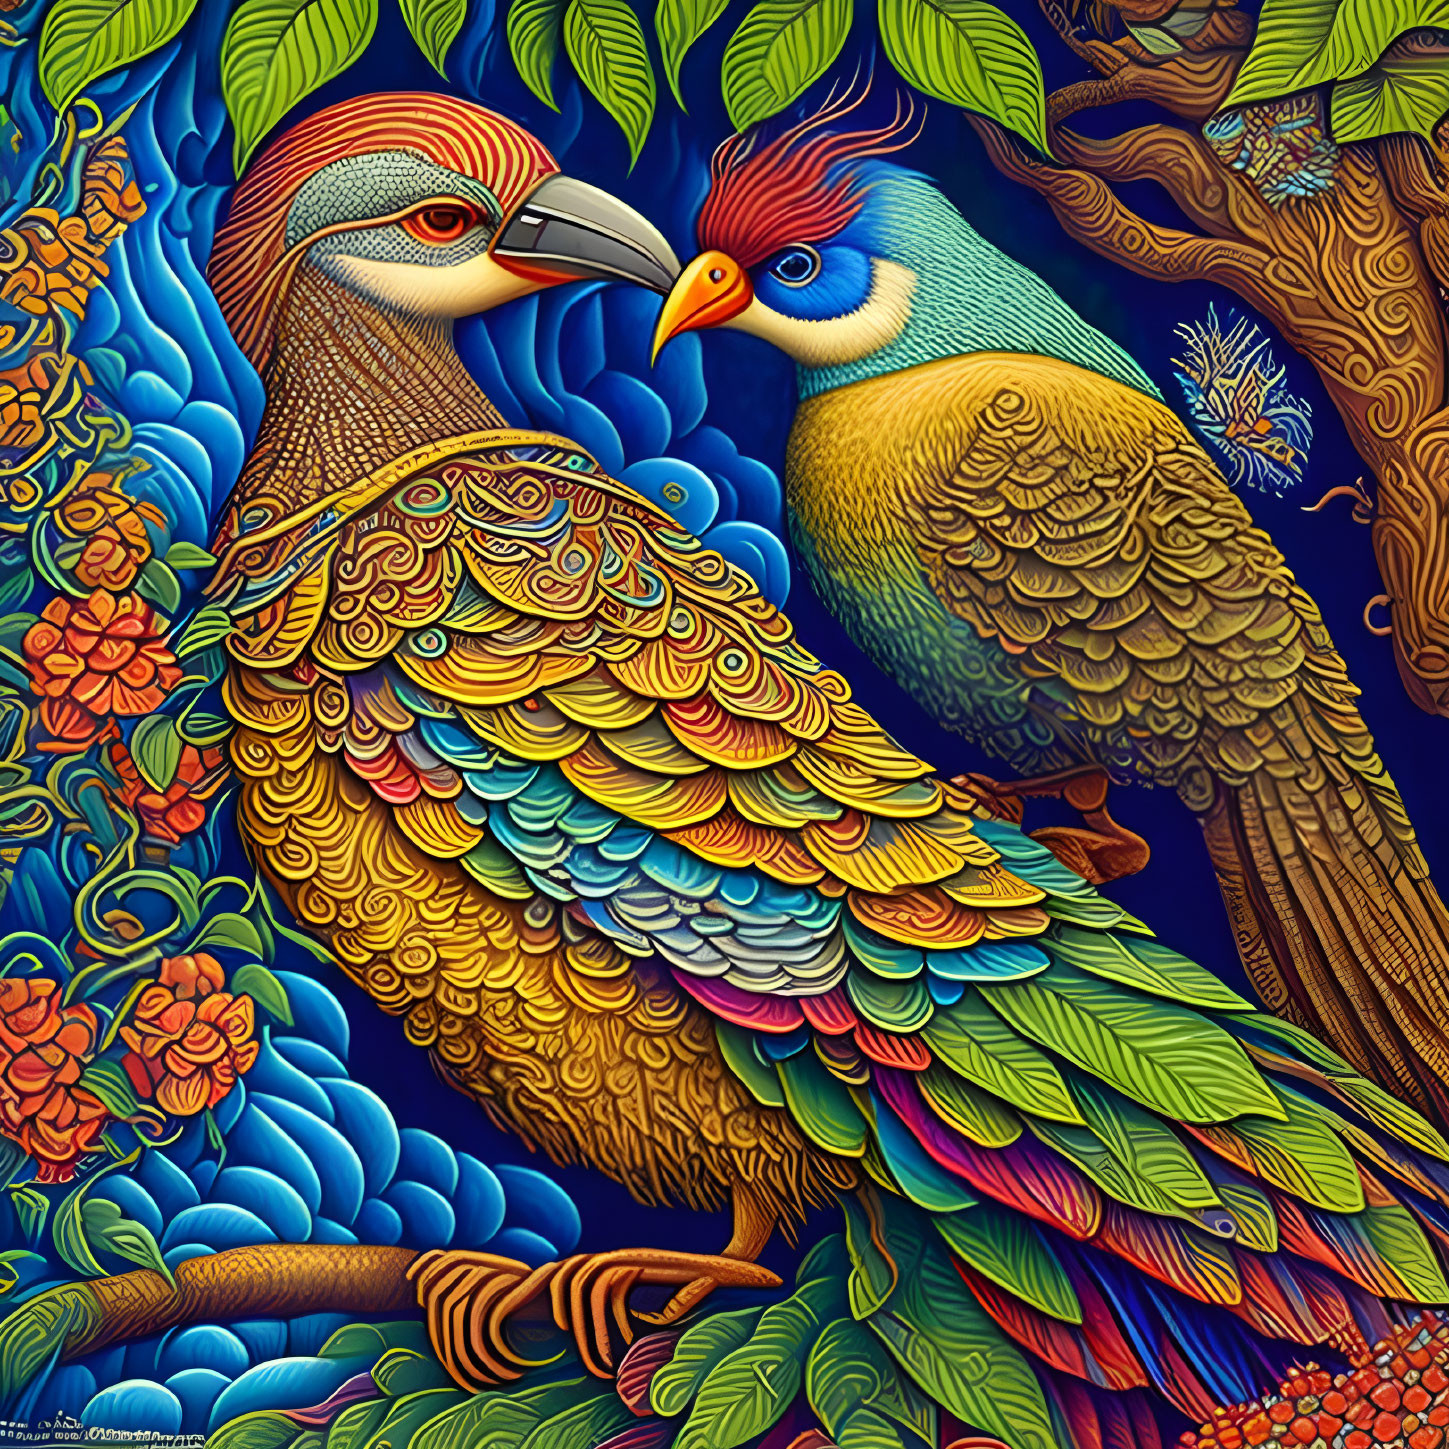 Colorful Stylized Birds Facing Each Other on Blue Floral Background